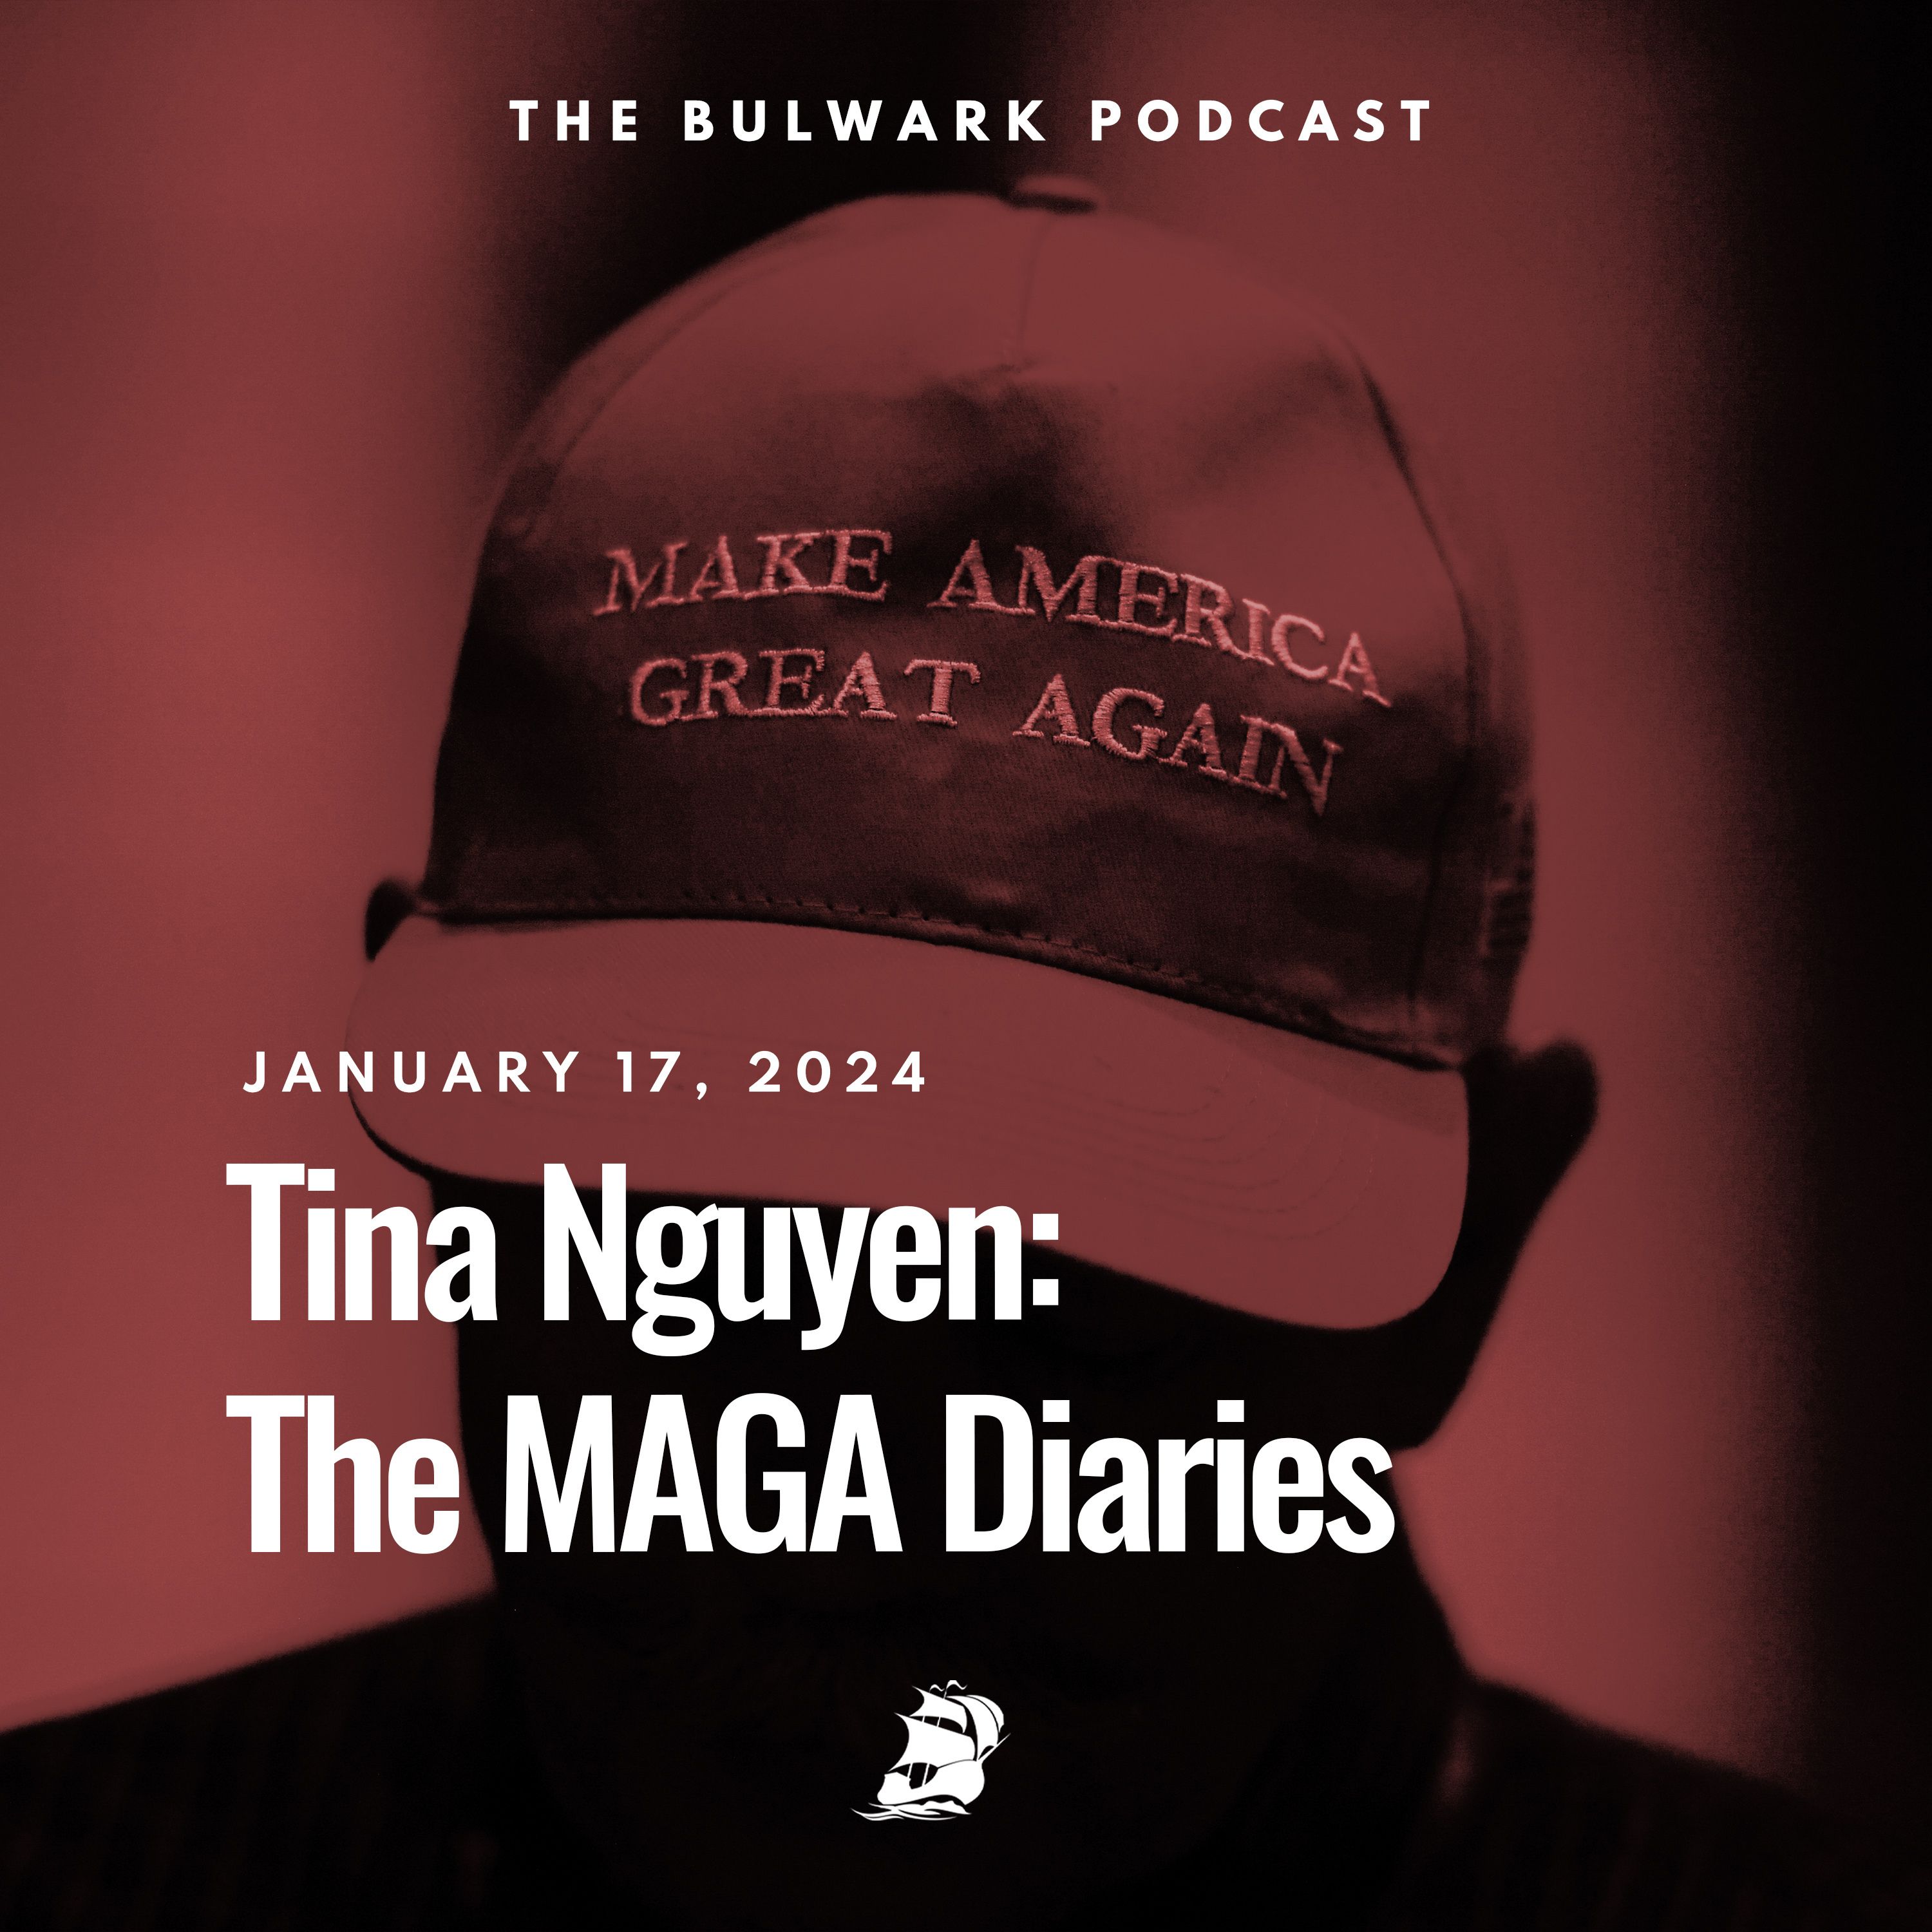 Tina Nguyen: The MAGA Diaries   by The Bulwark Podcast